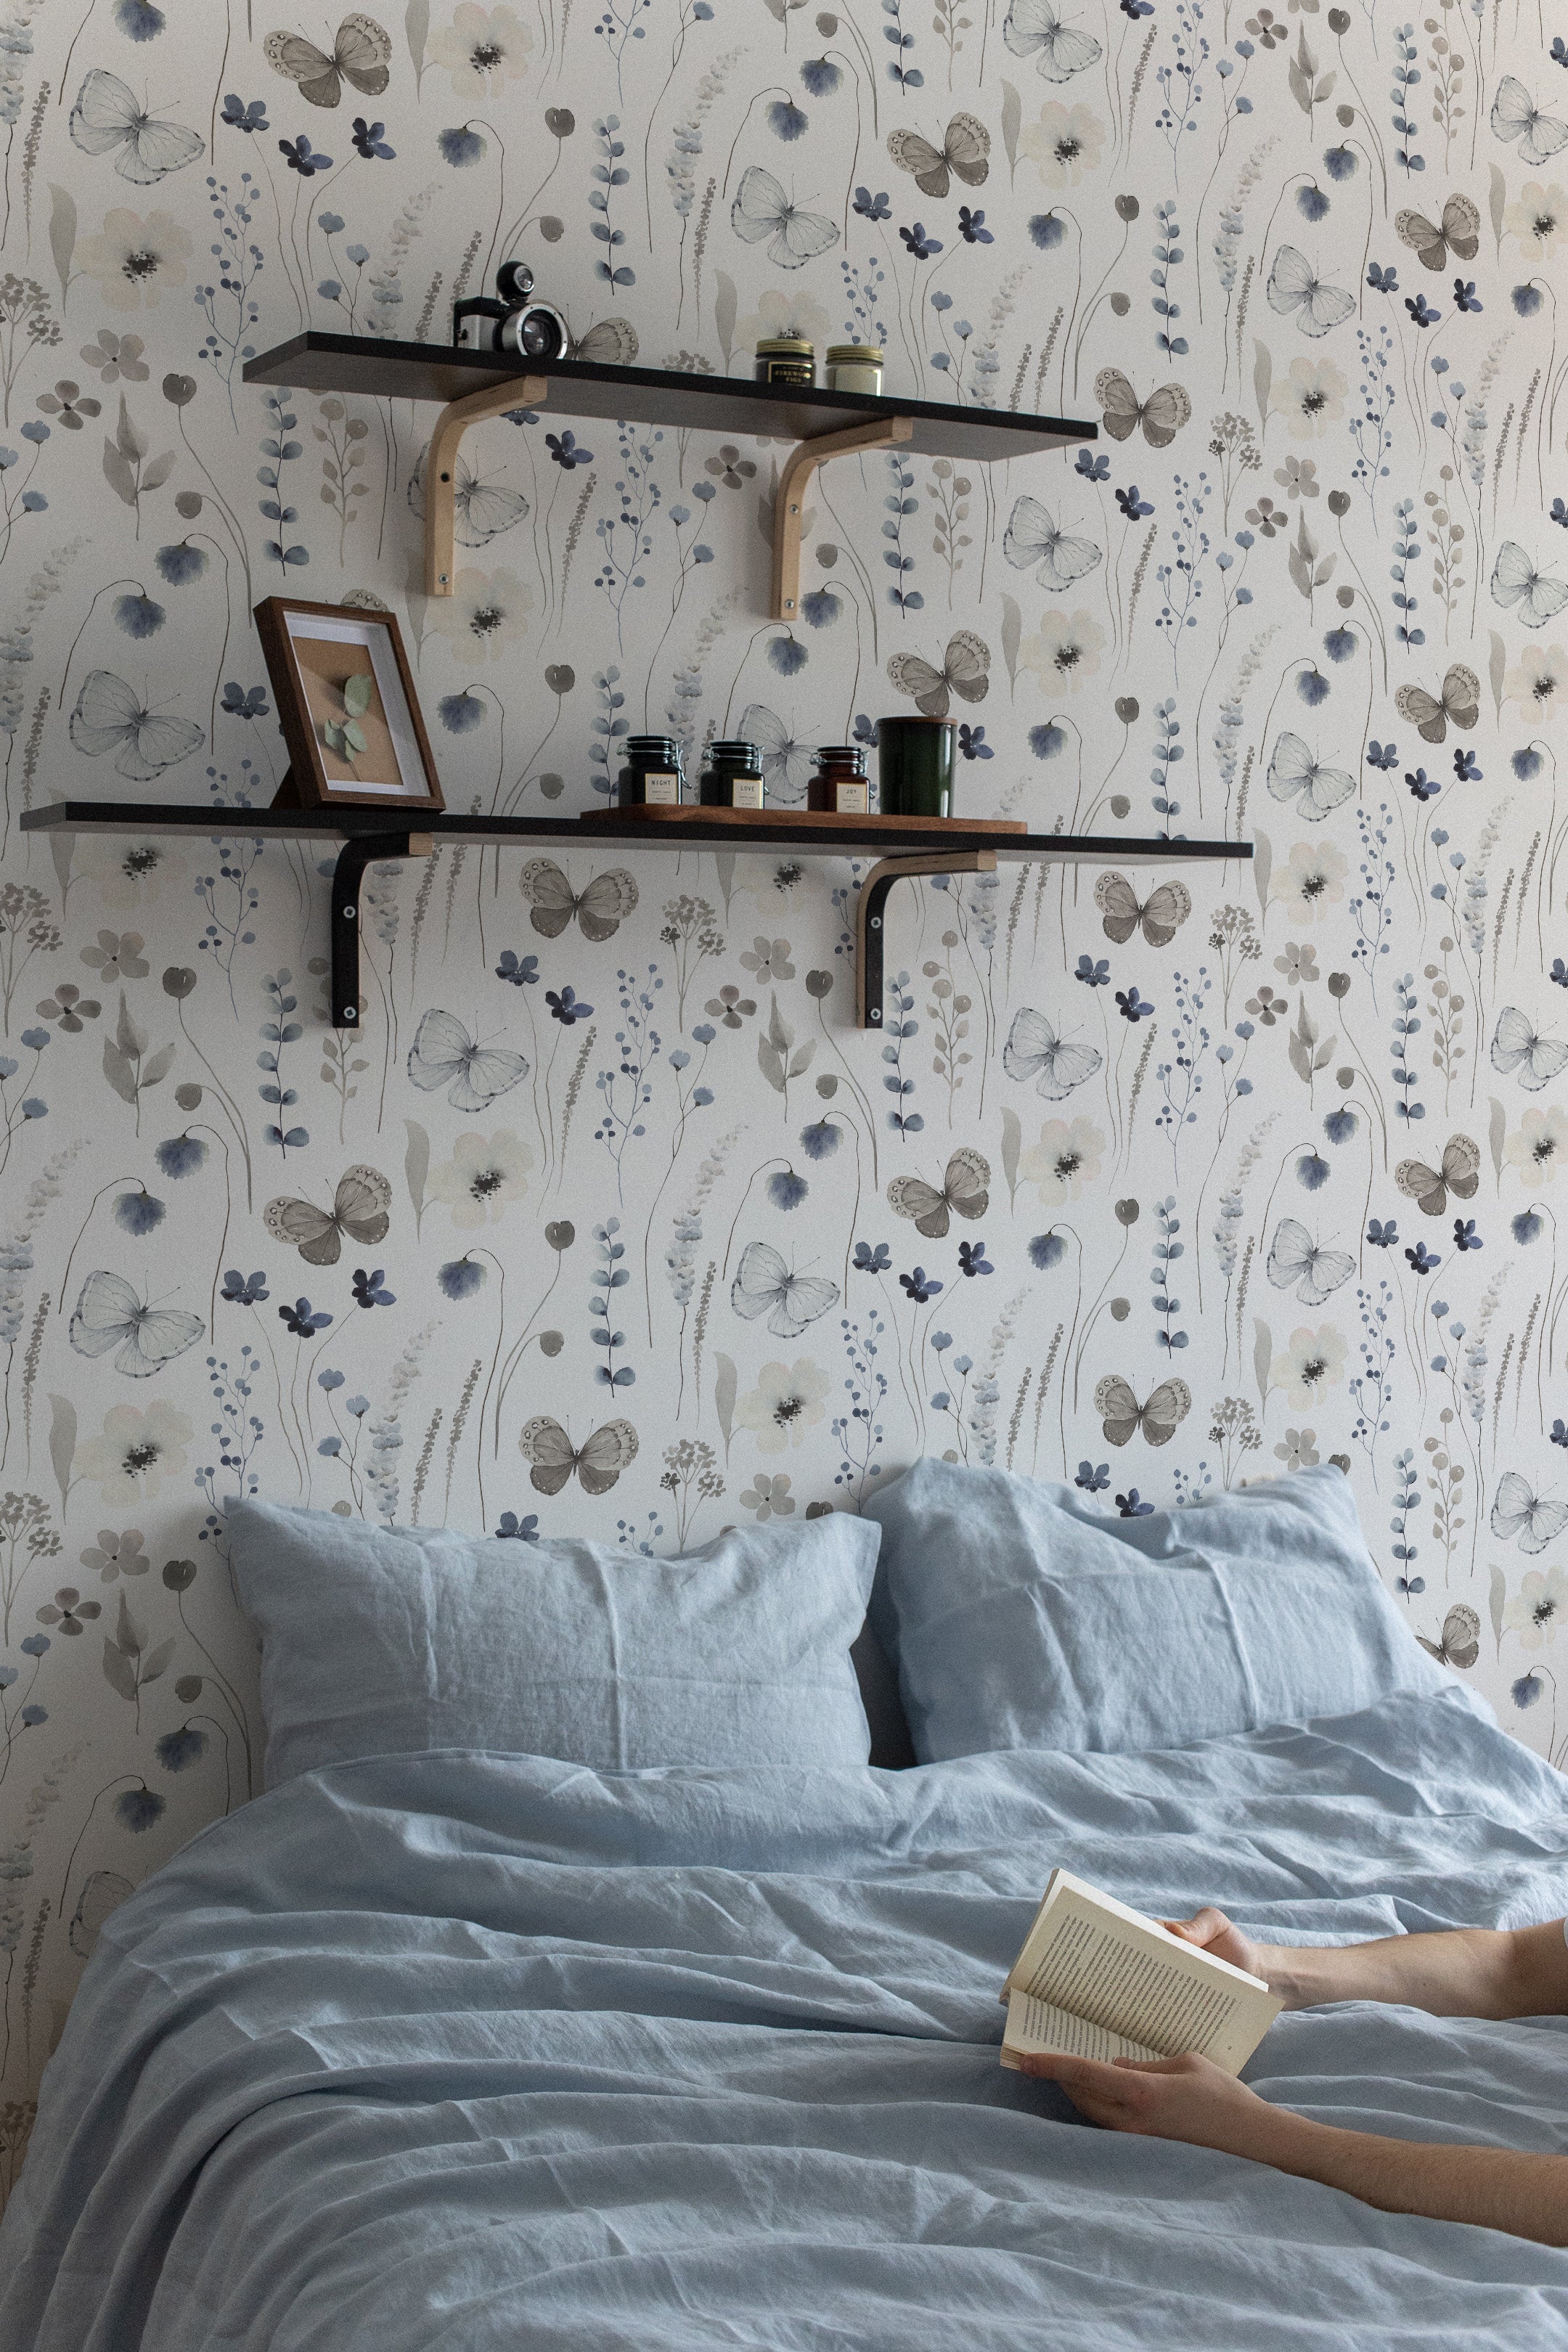 Bedroom scene featuring Soft Flutter Wallpaper with a serene butterfly and floral motif in muted colors. A bed with soft blue linen is partially visible, enhancing the peaceful ambiance, complemented by wooden shelves with minimalist decor